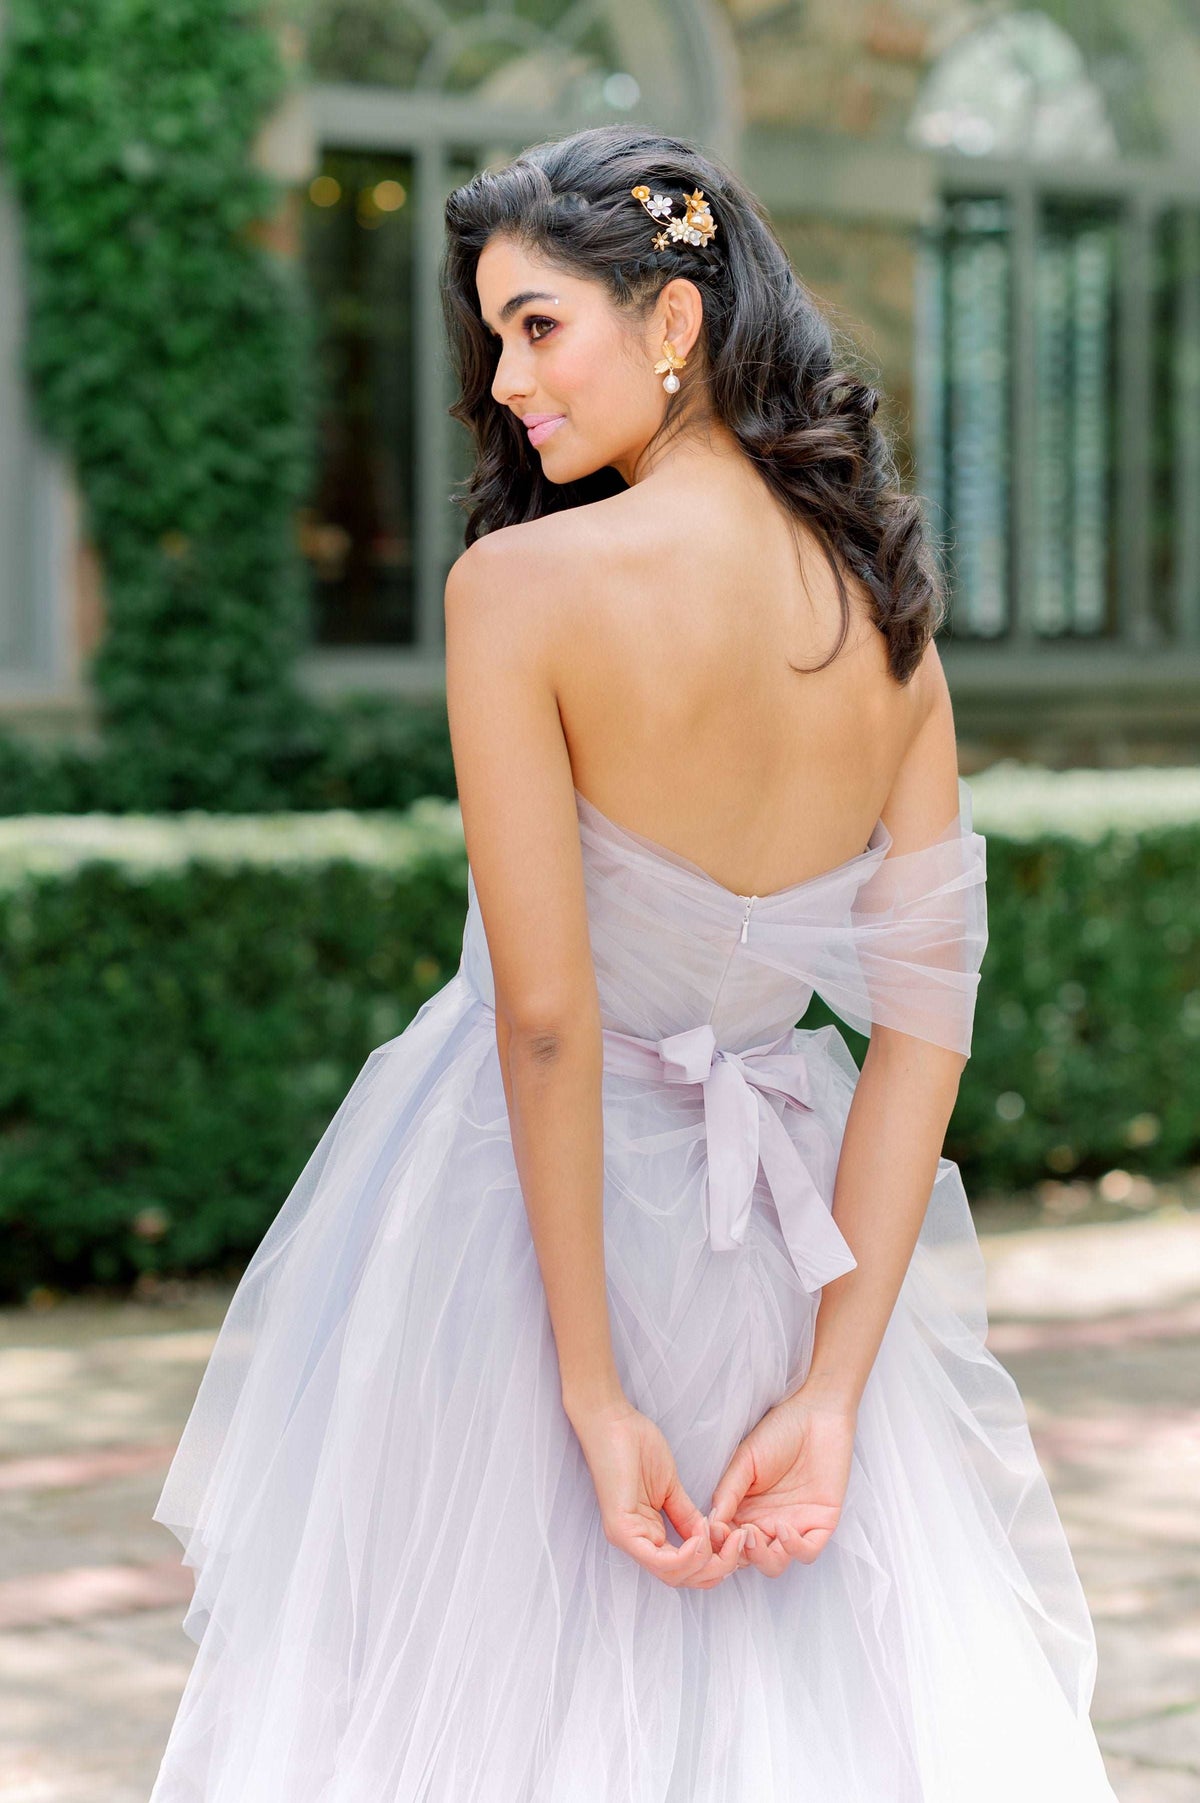 Ultimate fun whimsical wedding dress. Lavender tulle, ruffled skirt. Two piece wedding dress with short dress and overskirt. Bow detail. By Catherine Langlois, Toronto